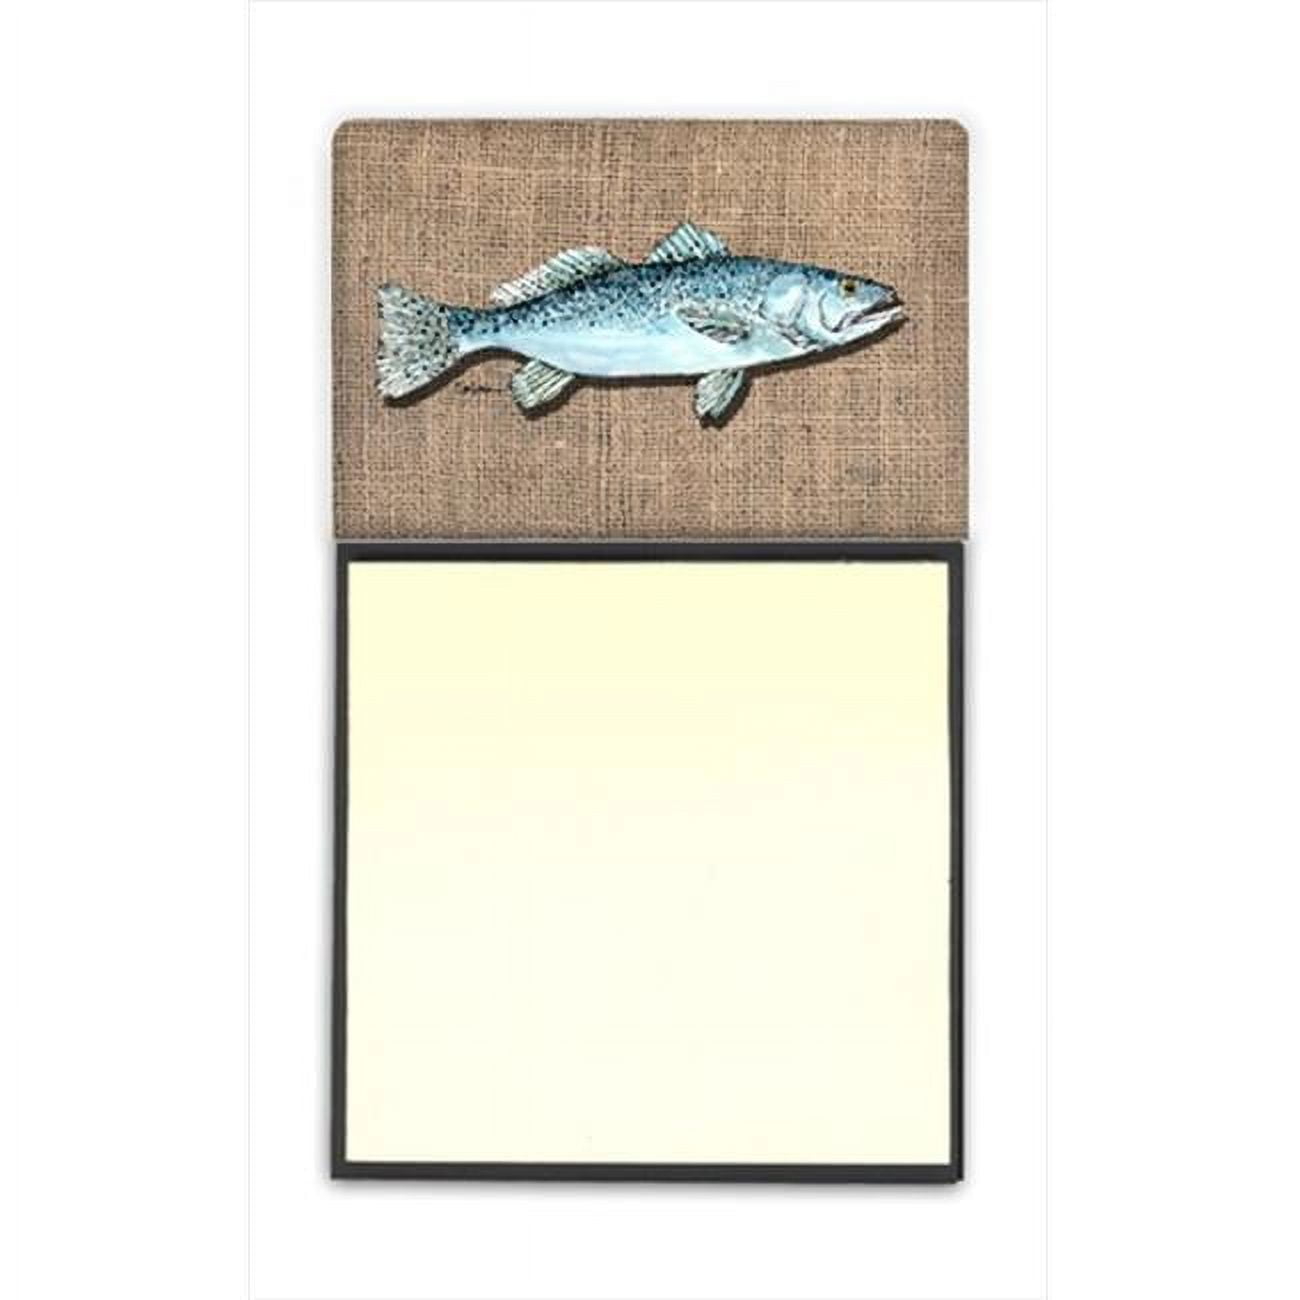 New Fishing Gear Desktop Memo Pad or Sticky Note Holder With Paper Weight